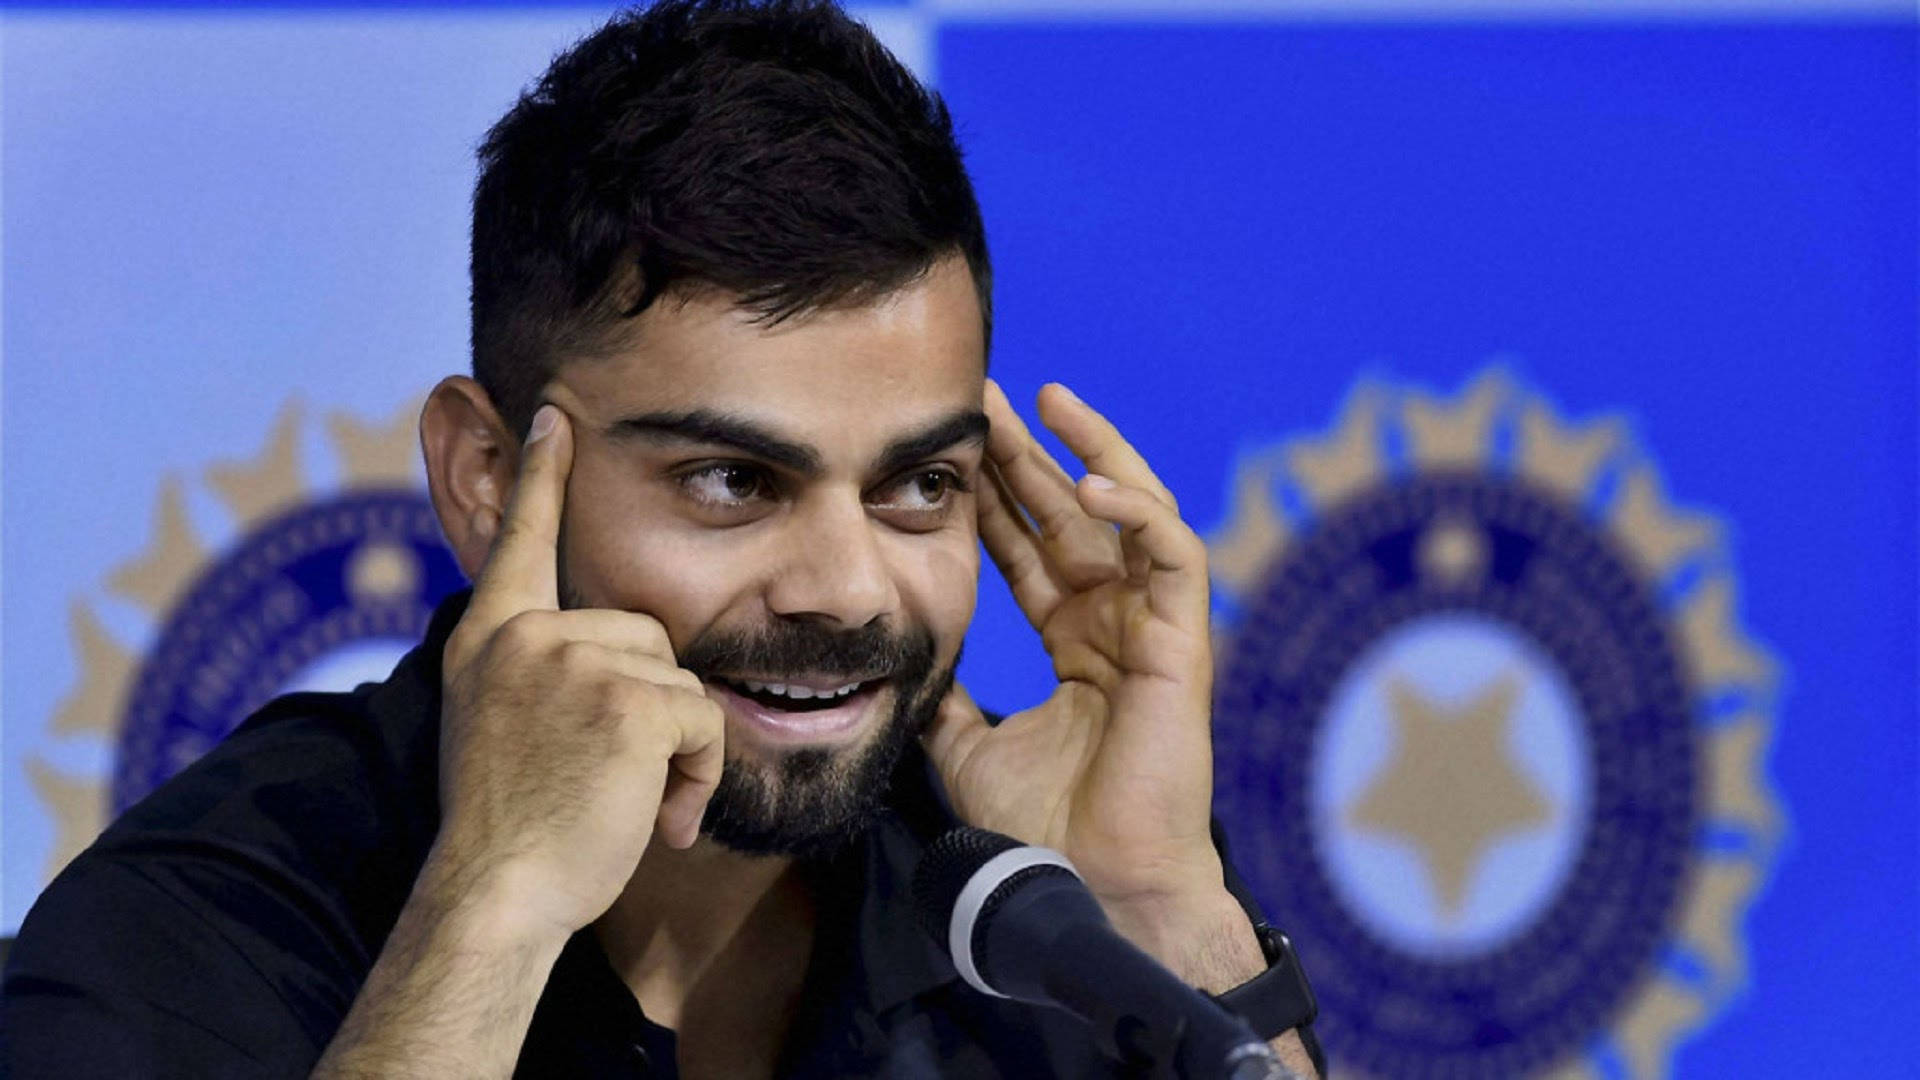 Viratkohli Interview. (there Is No Additional Context Provided To Translate This Sentence. However, If You Are Looking For A Translation Related To Computer Or Mobile Wallpaper, Please Provide More Specific Information So That I Can Assist You With An Accurate Translation.) Wallpaper